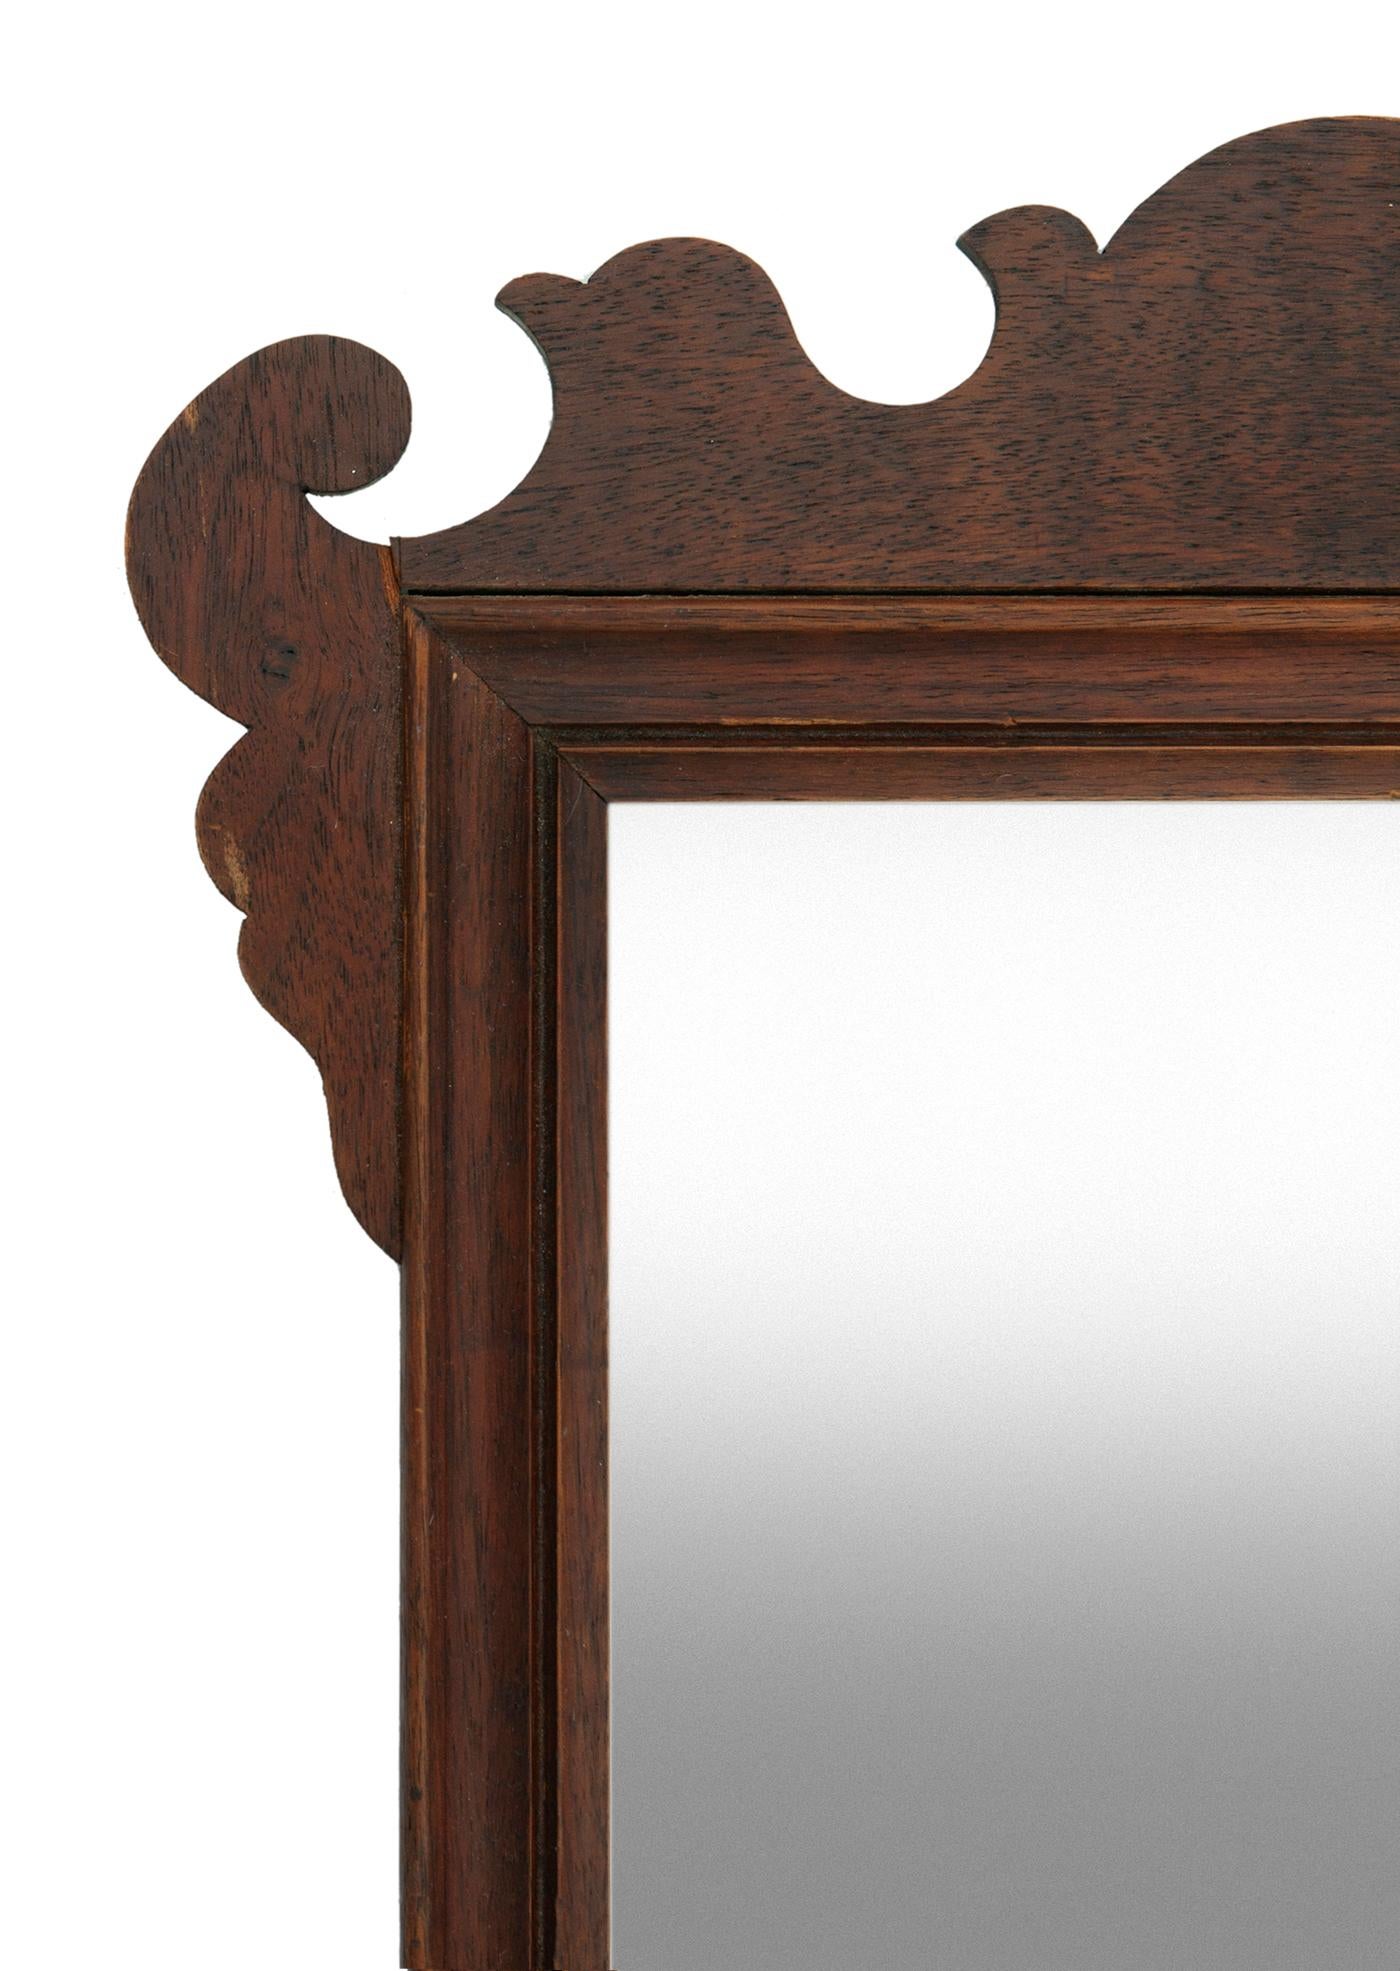 This mirror in a handcrafted frame, the frame, which is not complete in that the bottom, which is straight accross, missing original decorative bottom edge.
The wood is beautiful & the mirror still makes an attractive statement.